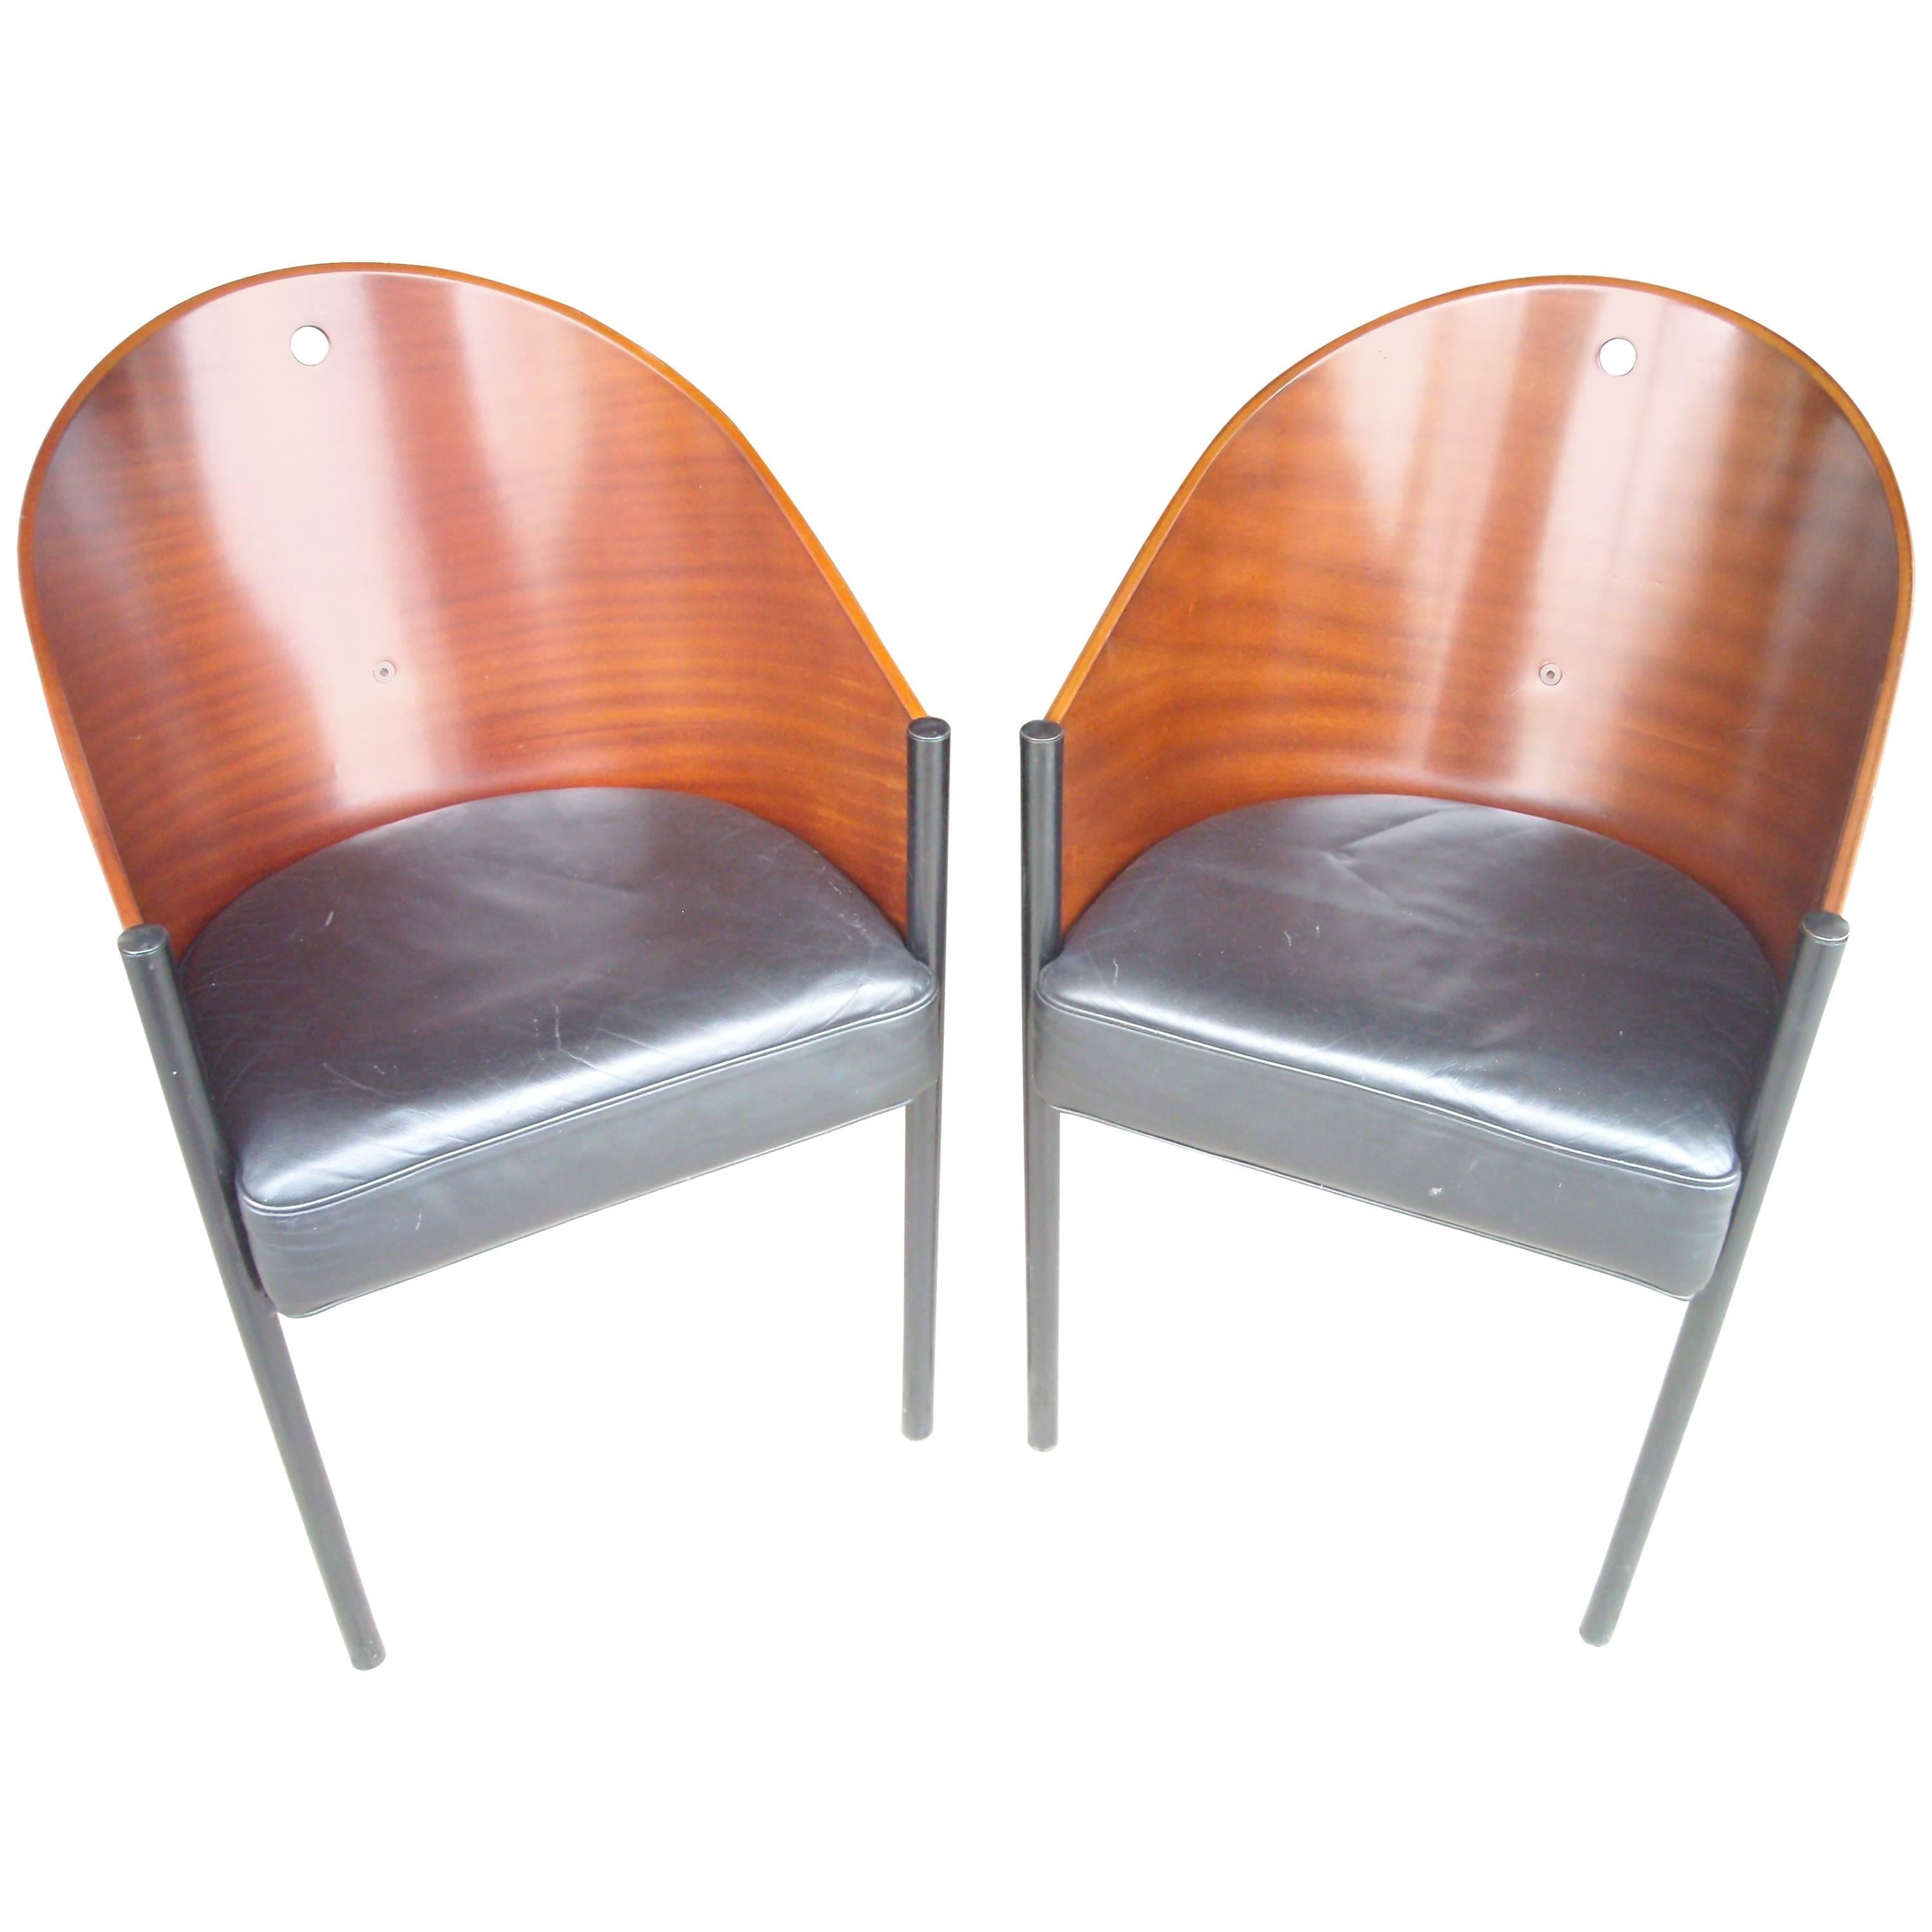 Philippe Starck "Costes" Side or Armchairs, Three Legs